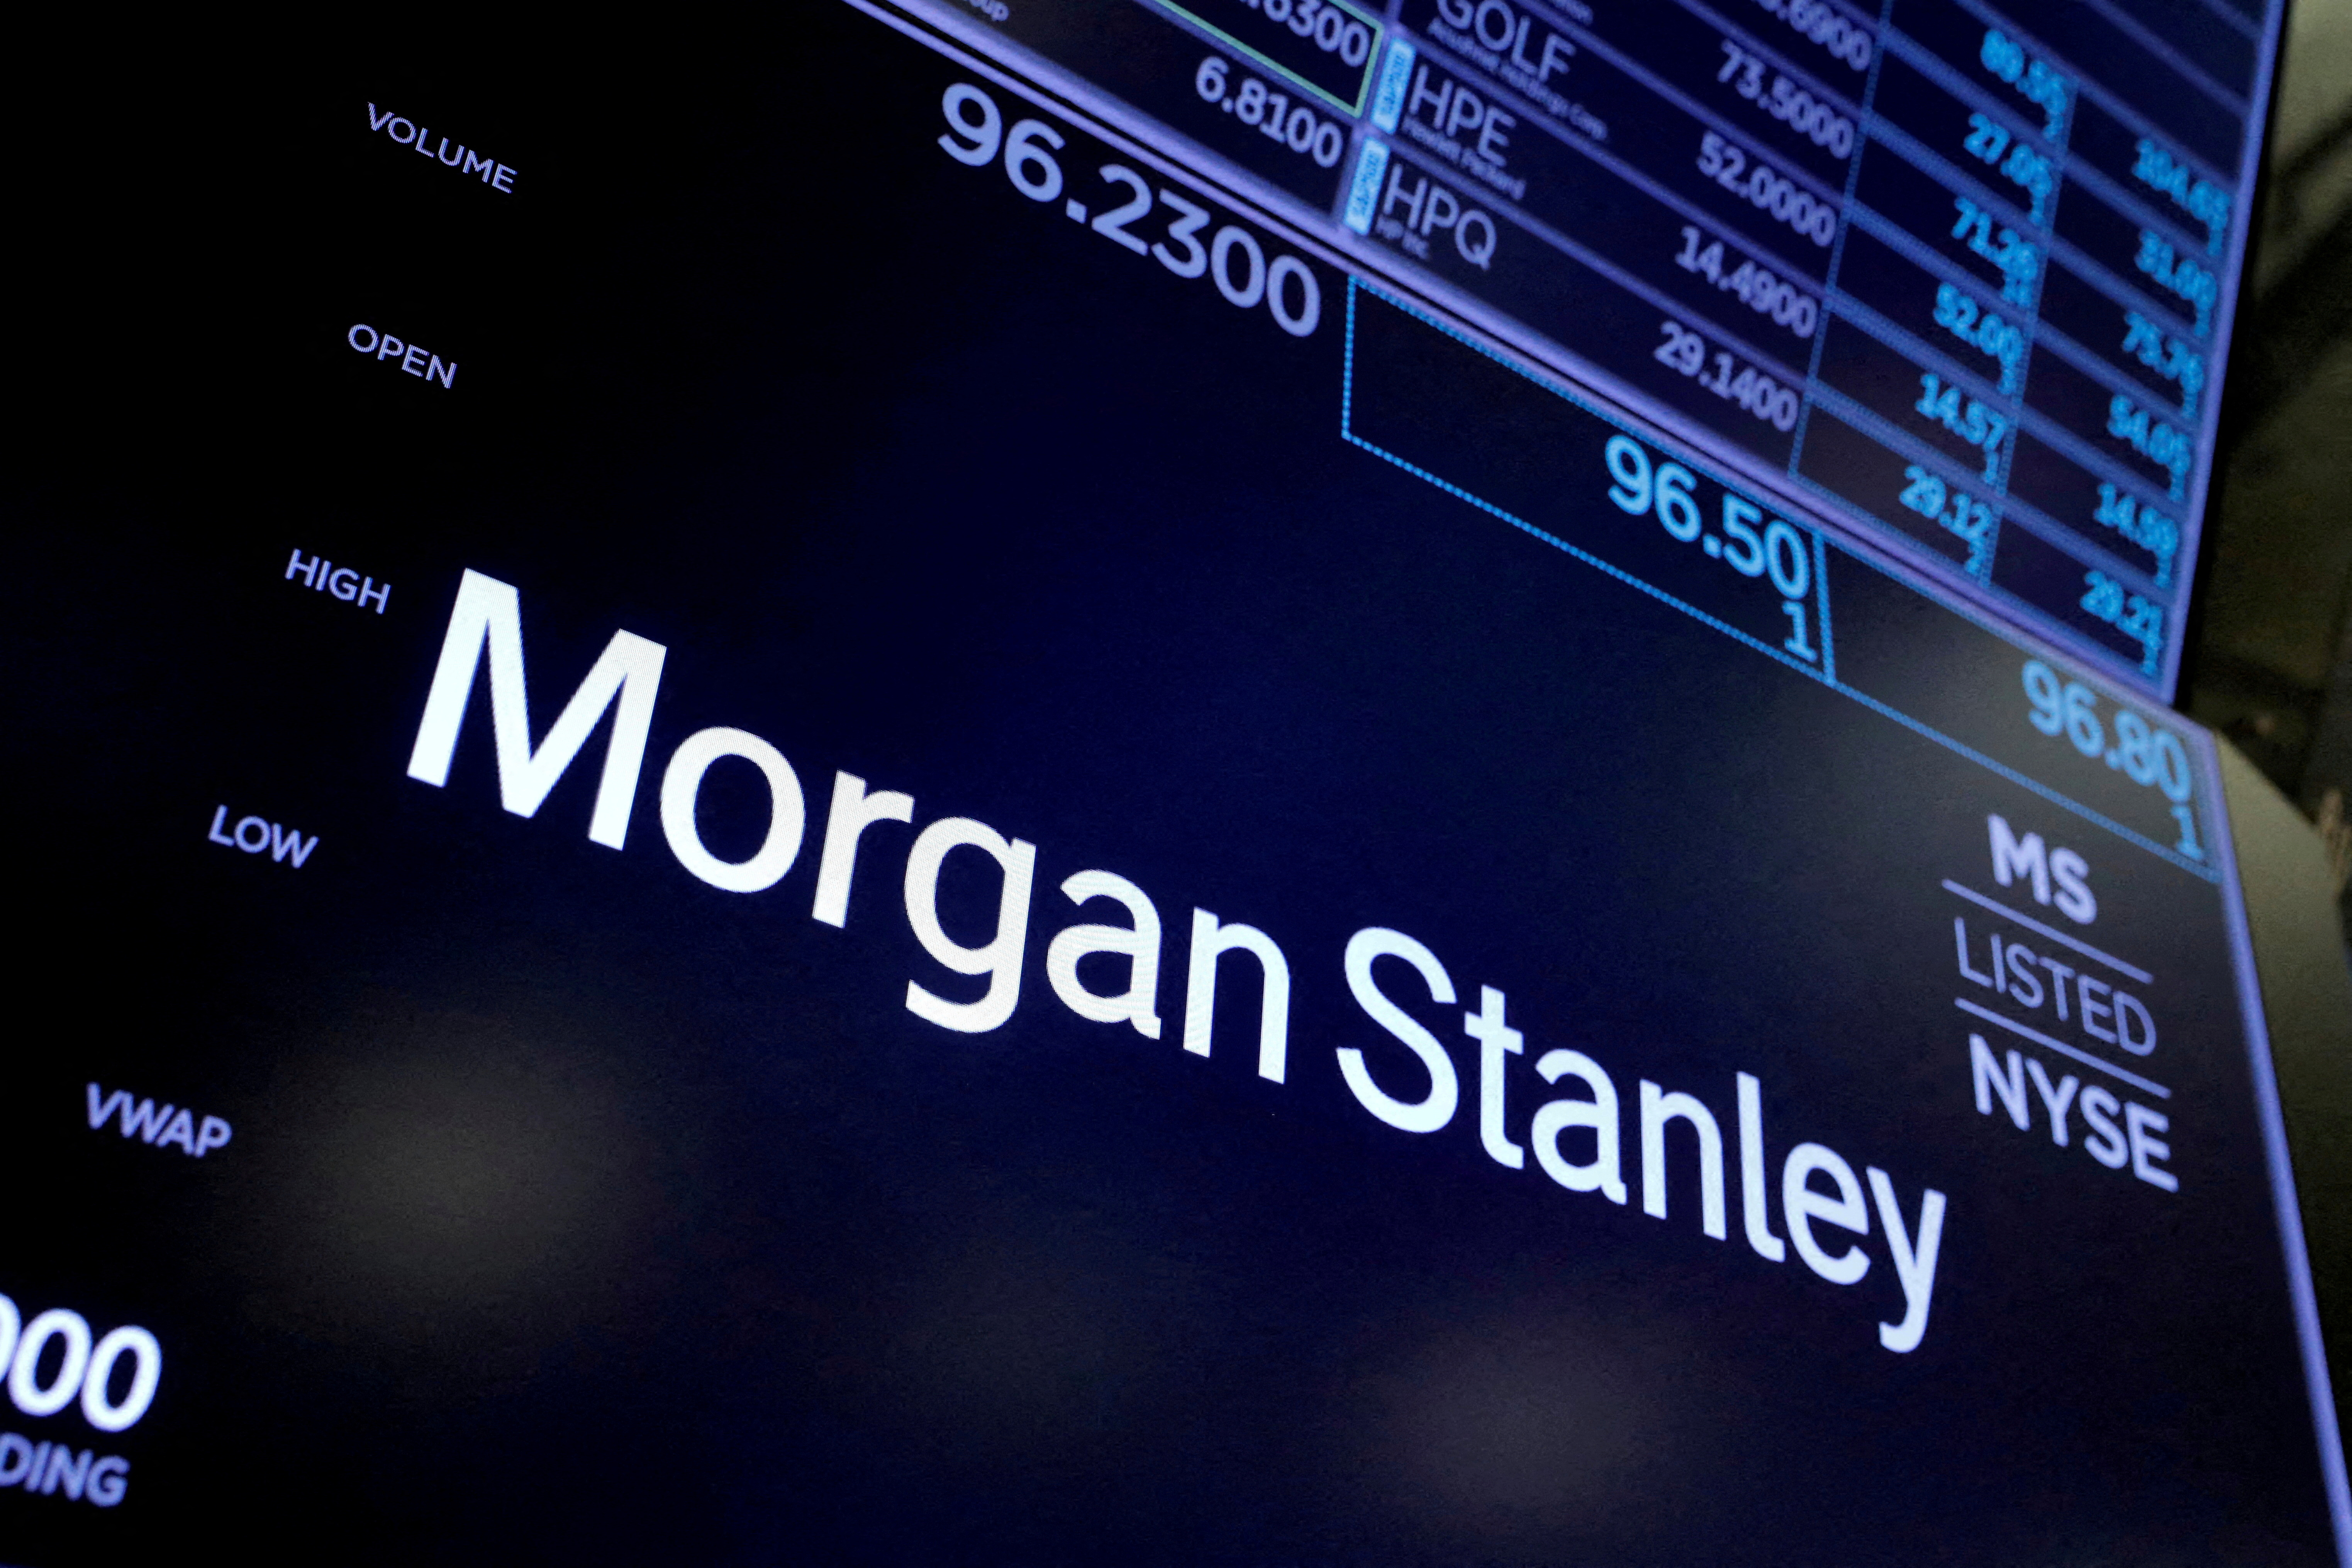 The logo for Morgan Stanley is seen on the trading floor at the New York Stock Exchange (NYSE) in Manhattan, New York City